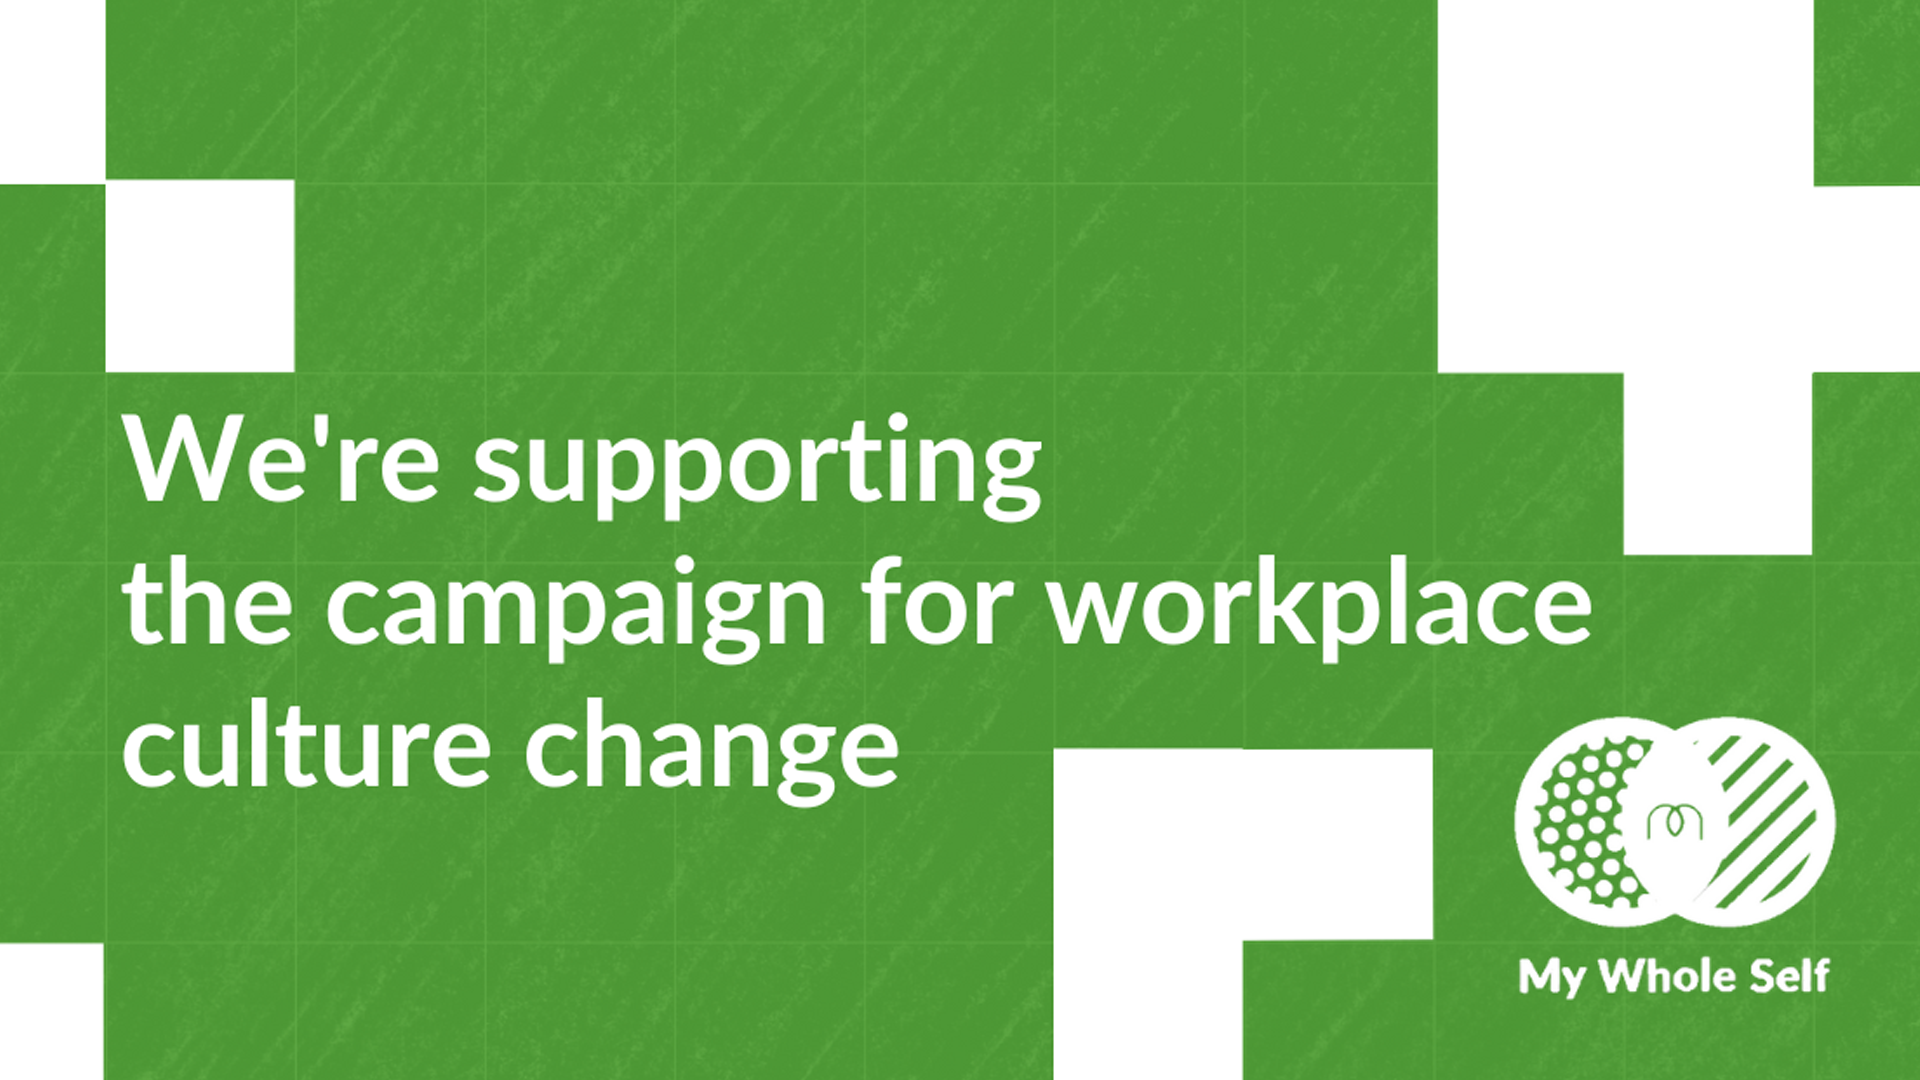 img-rose-were-supporting-the-campaign-for-workplace-culture-change-01